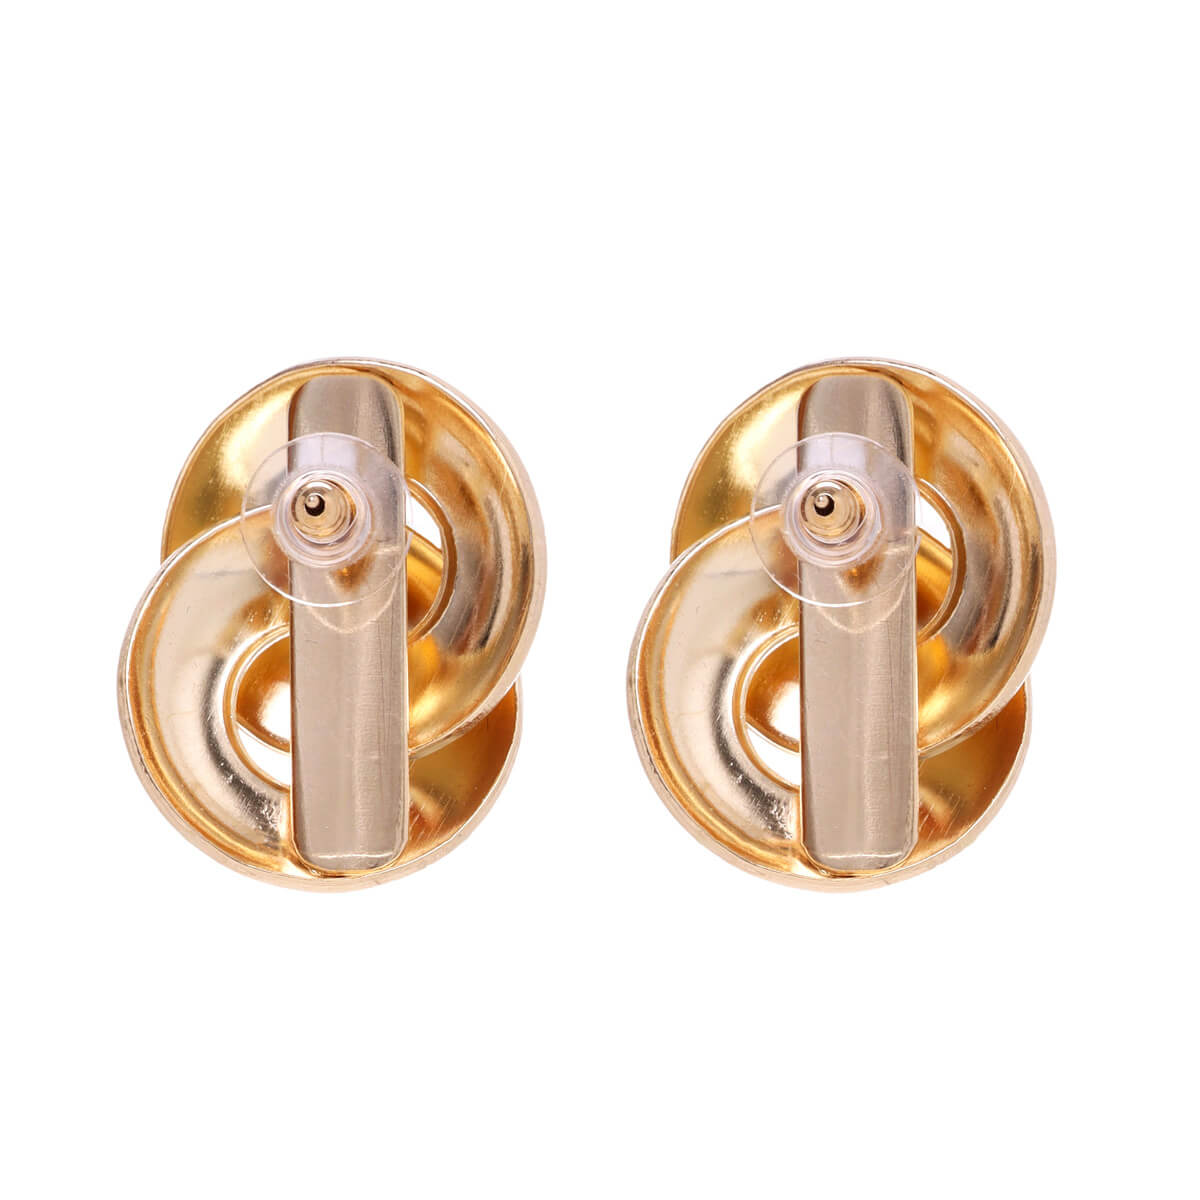 Big round earrings with overlapping rings